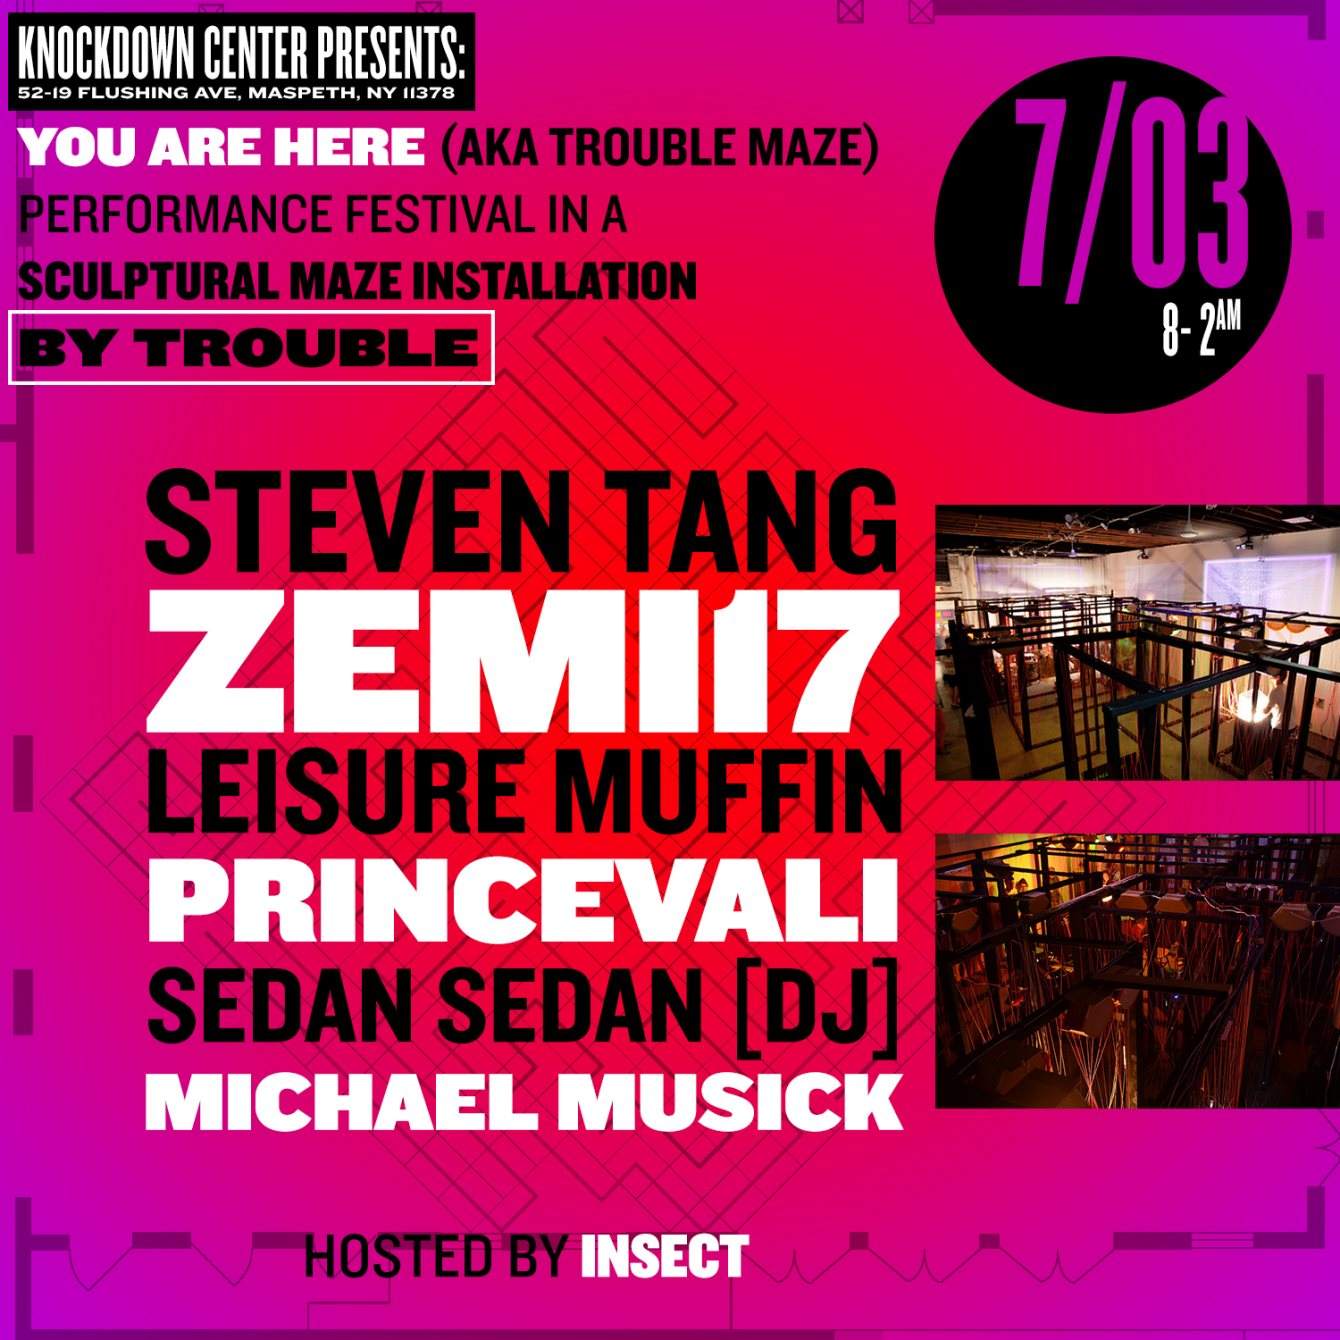 Insect presents: Steven Tang, Zemi17, Leisure Muffin & More - Página frontal